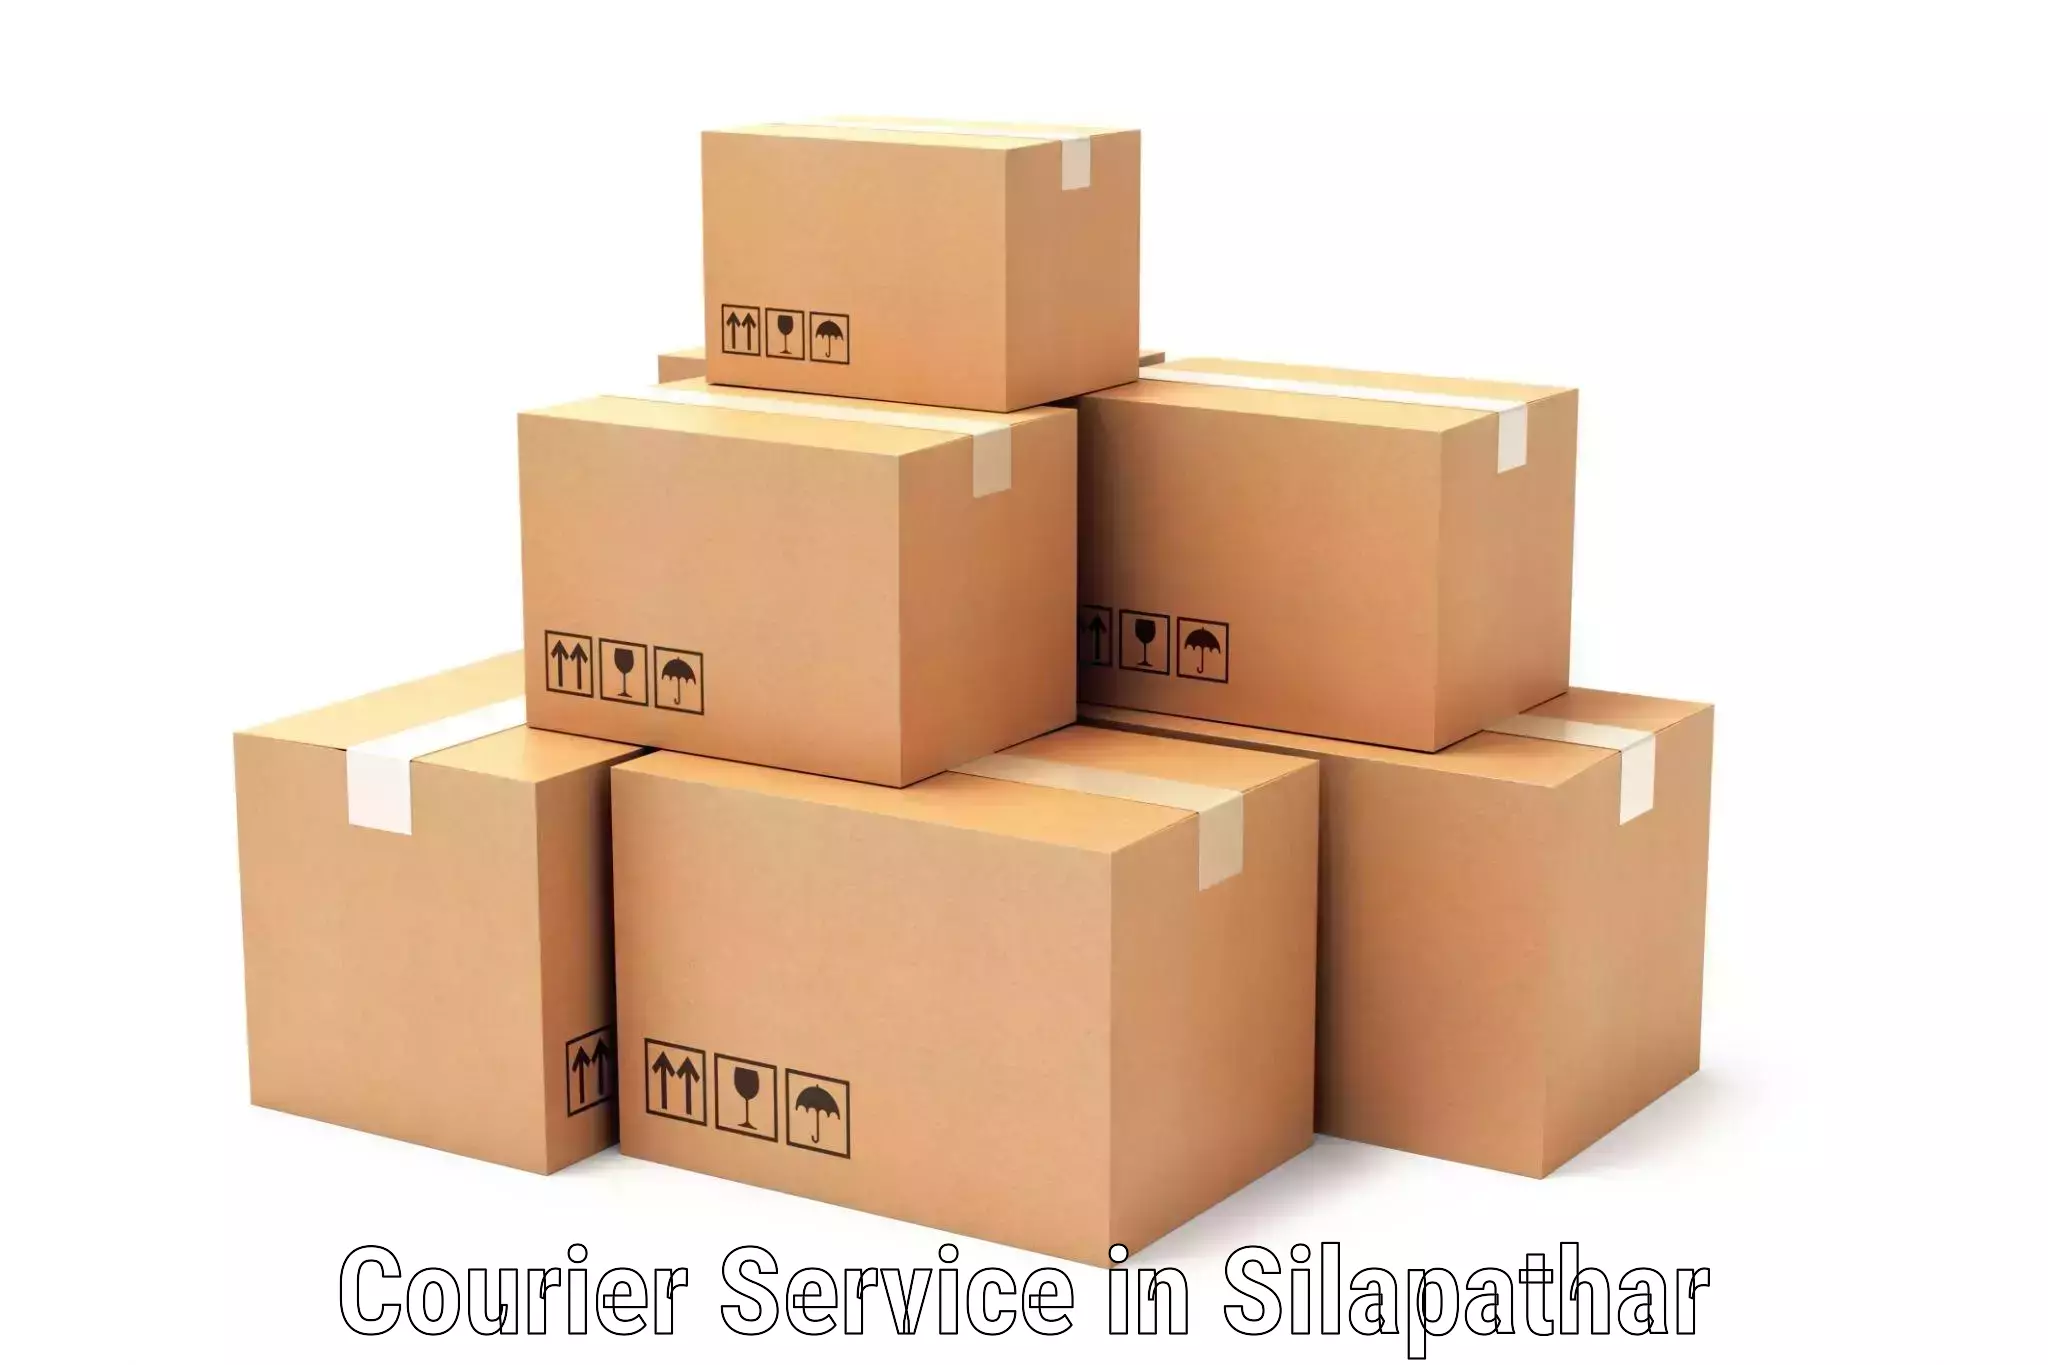 Comprehensive logistics solutions in Silapathar